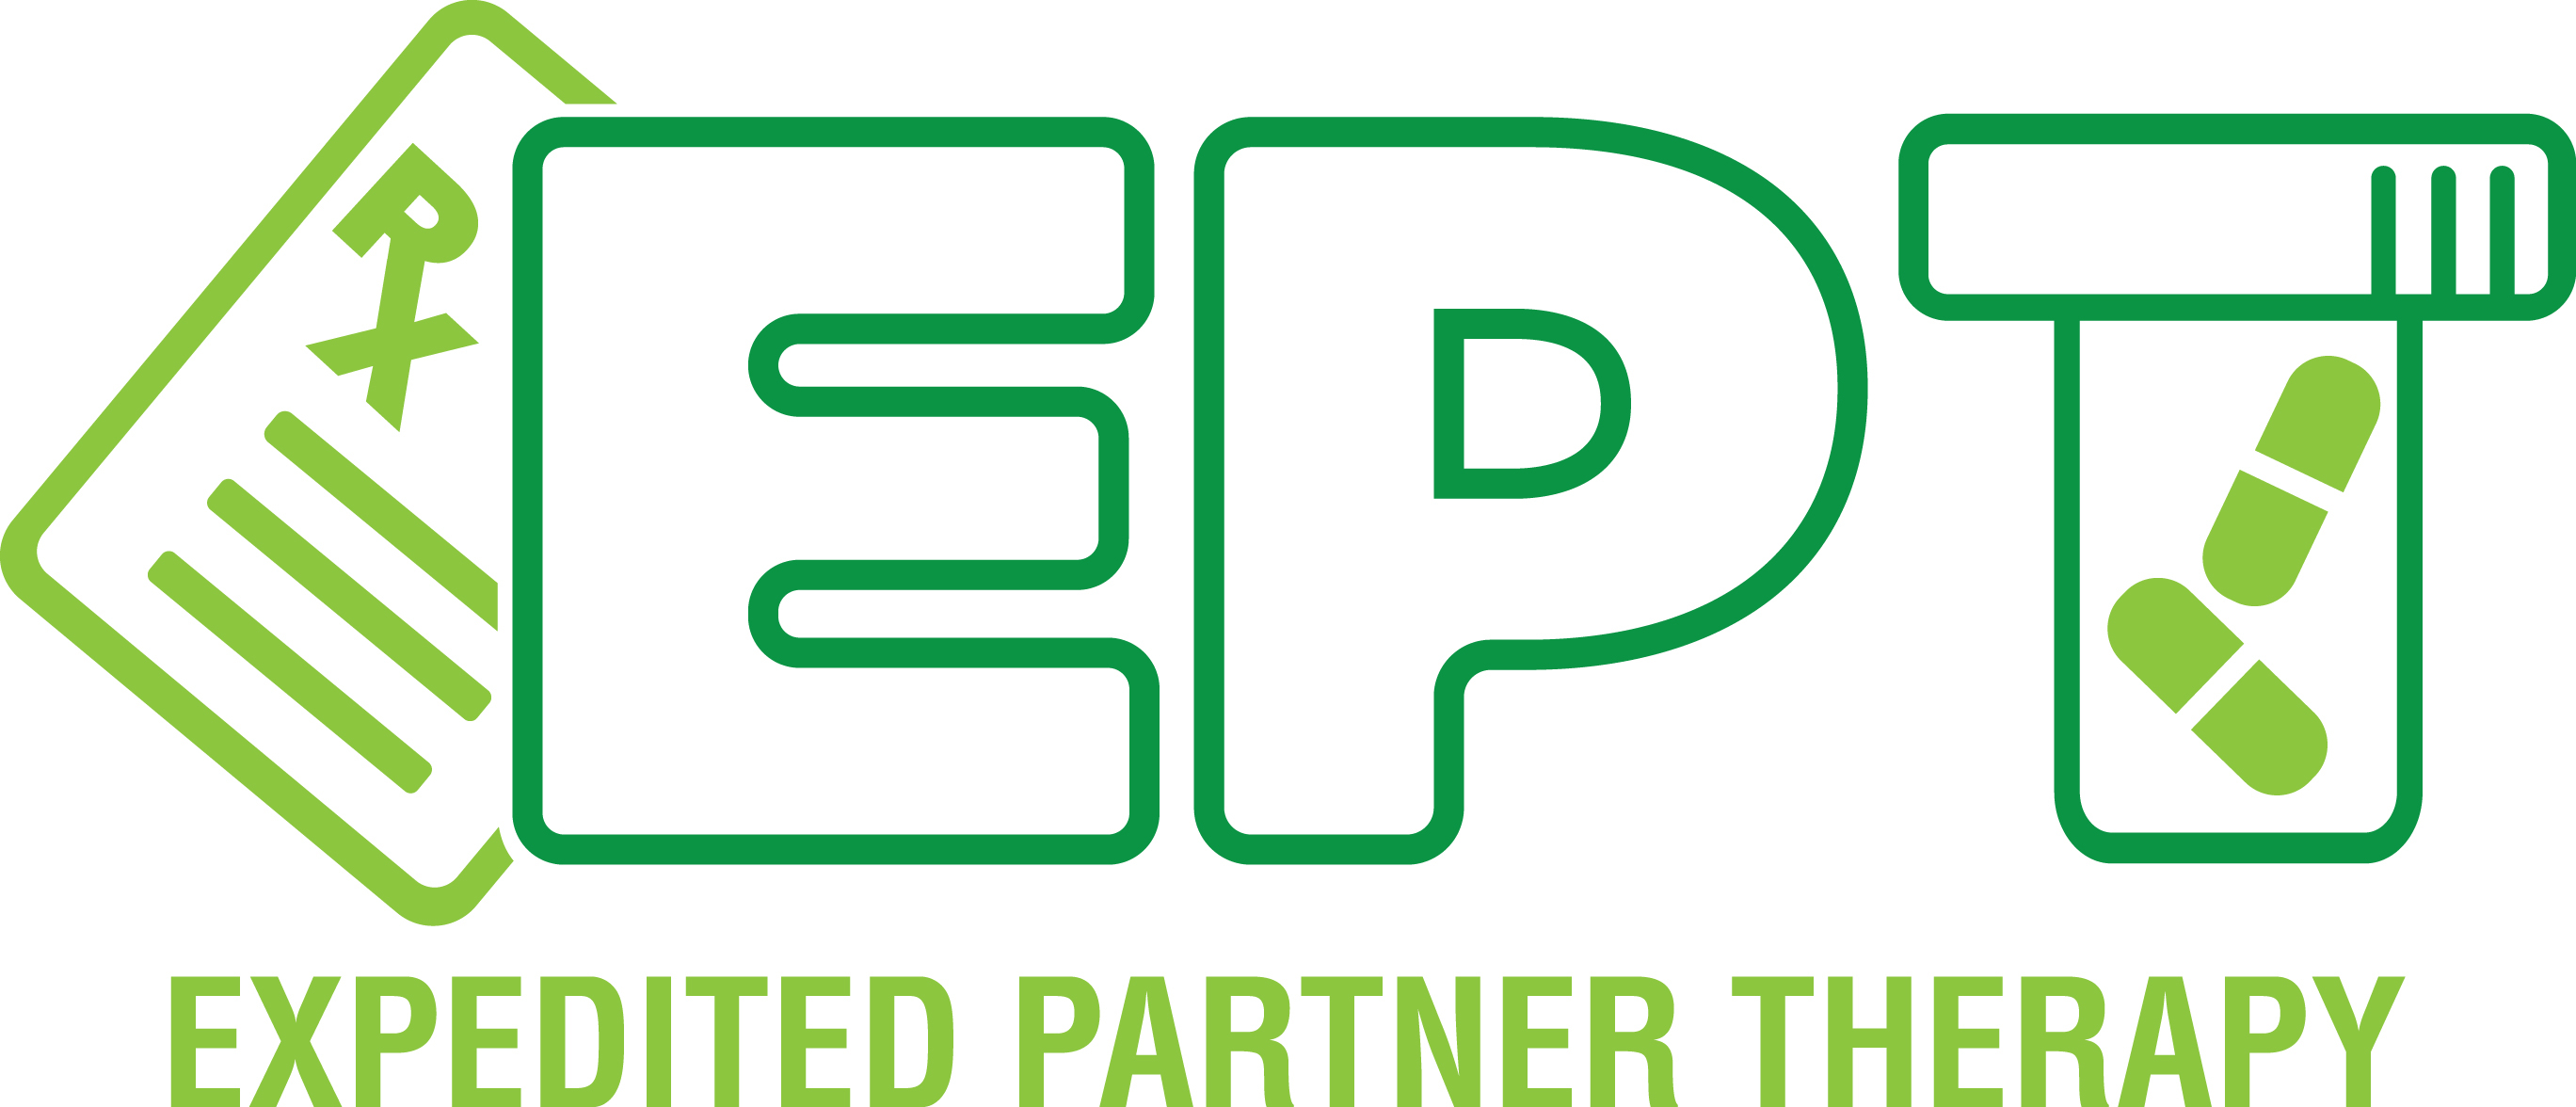 Expidited Partner Therapy logo